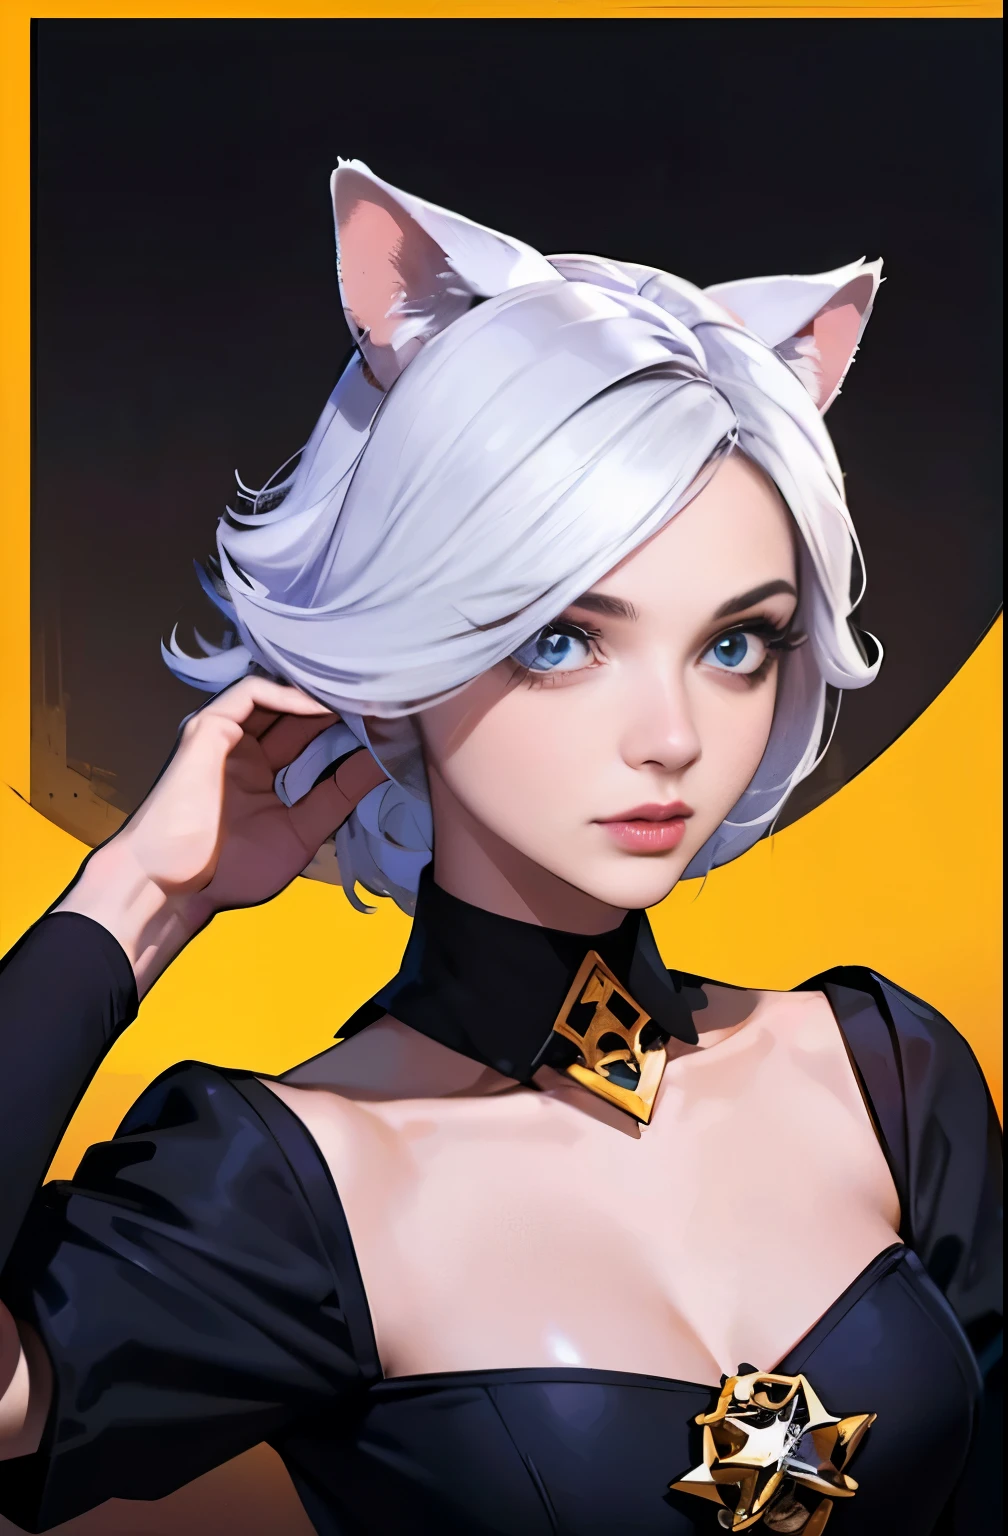 best qualityer, Super high resolution, (photorrealistic:1.3), CRU photo, 1 European woman, 30years, fine-details, ((Bright red cat eyes)), ((burgundy eye shadow)), (((blue black hair))), ((Hair is like darkness)), Cat's ears, cat tail, work of art, Resolute stance, Resolute stance, posando, Growth is worth it, adventurer costume, adventurer clothing, Long manicure, Fabric exhibition, beautiful detailed eyes, beautiful detailed lips, long eyelashes, noble atmosphere, Carisma Real, european face, Aryan face. The wide eyes, As a European, wasteland.